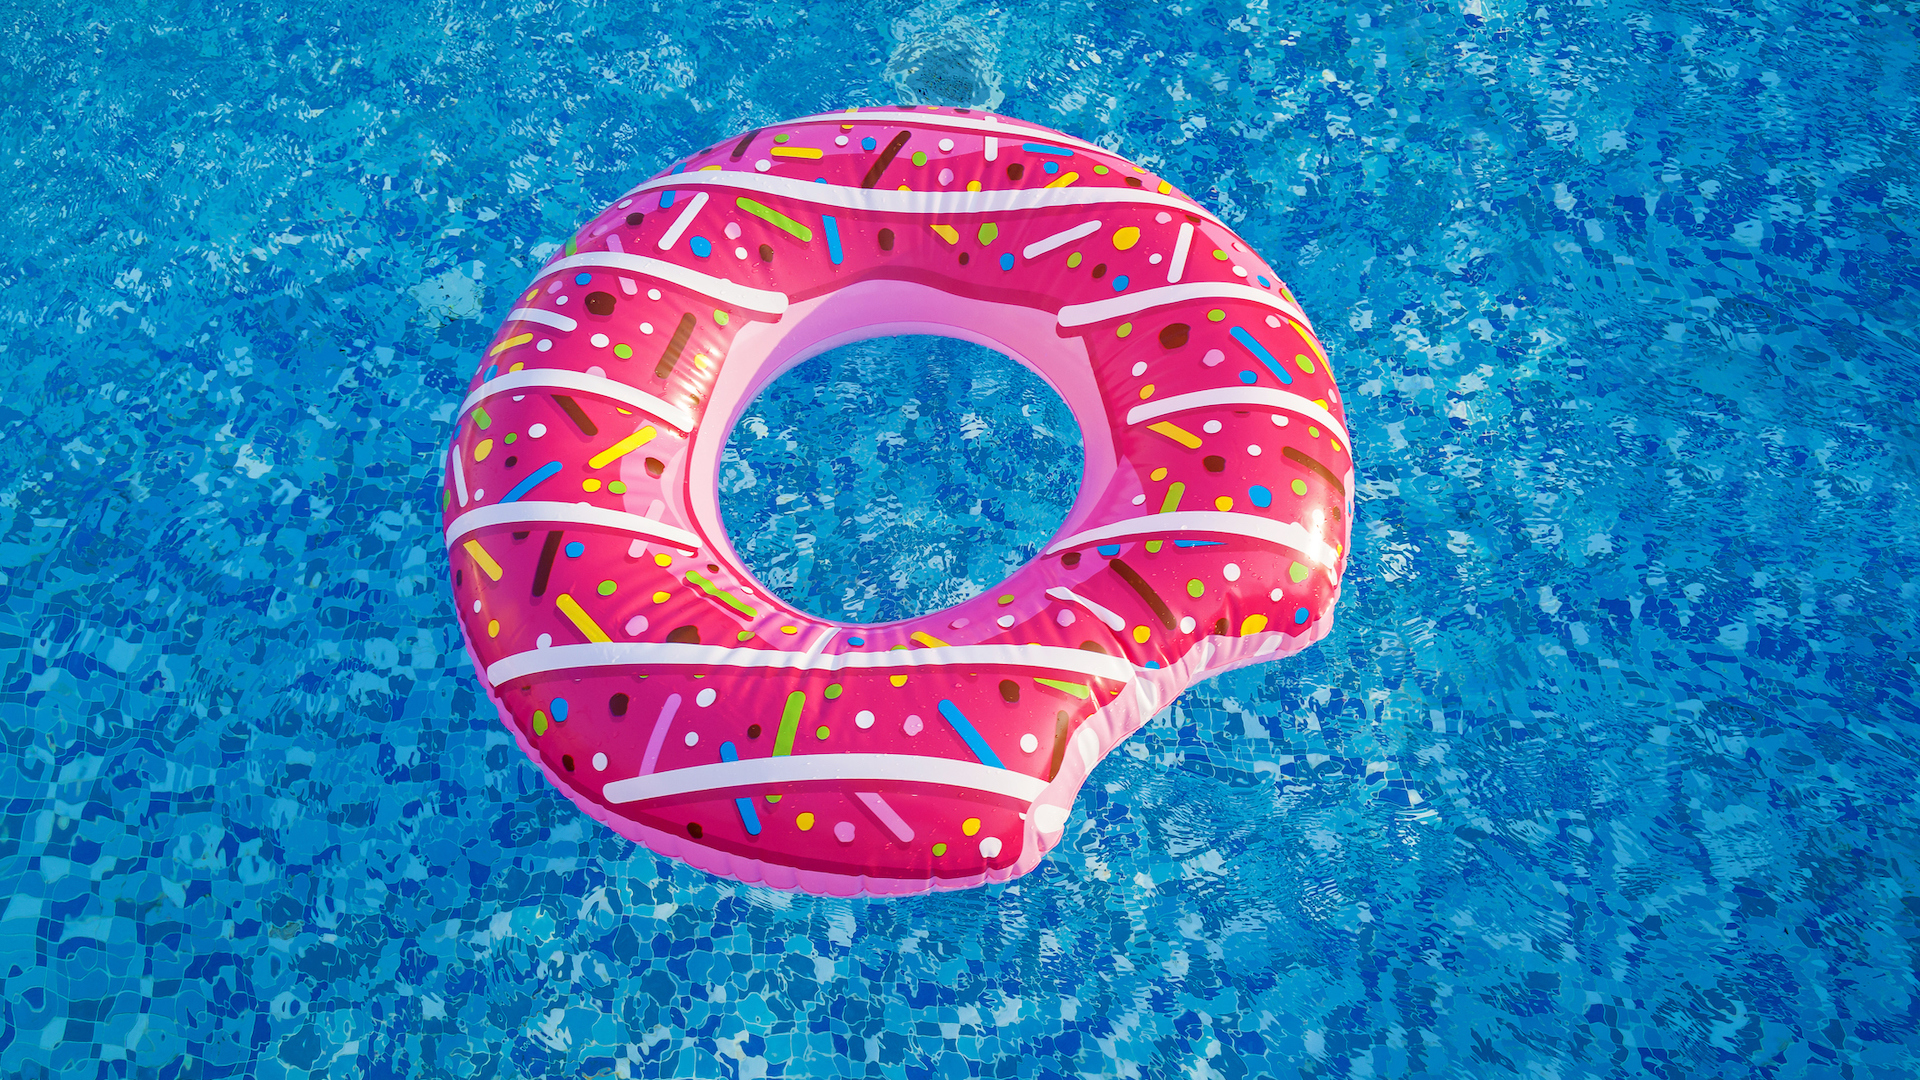 A pool float in the shape of a donut